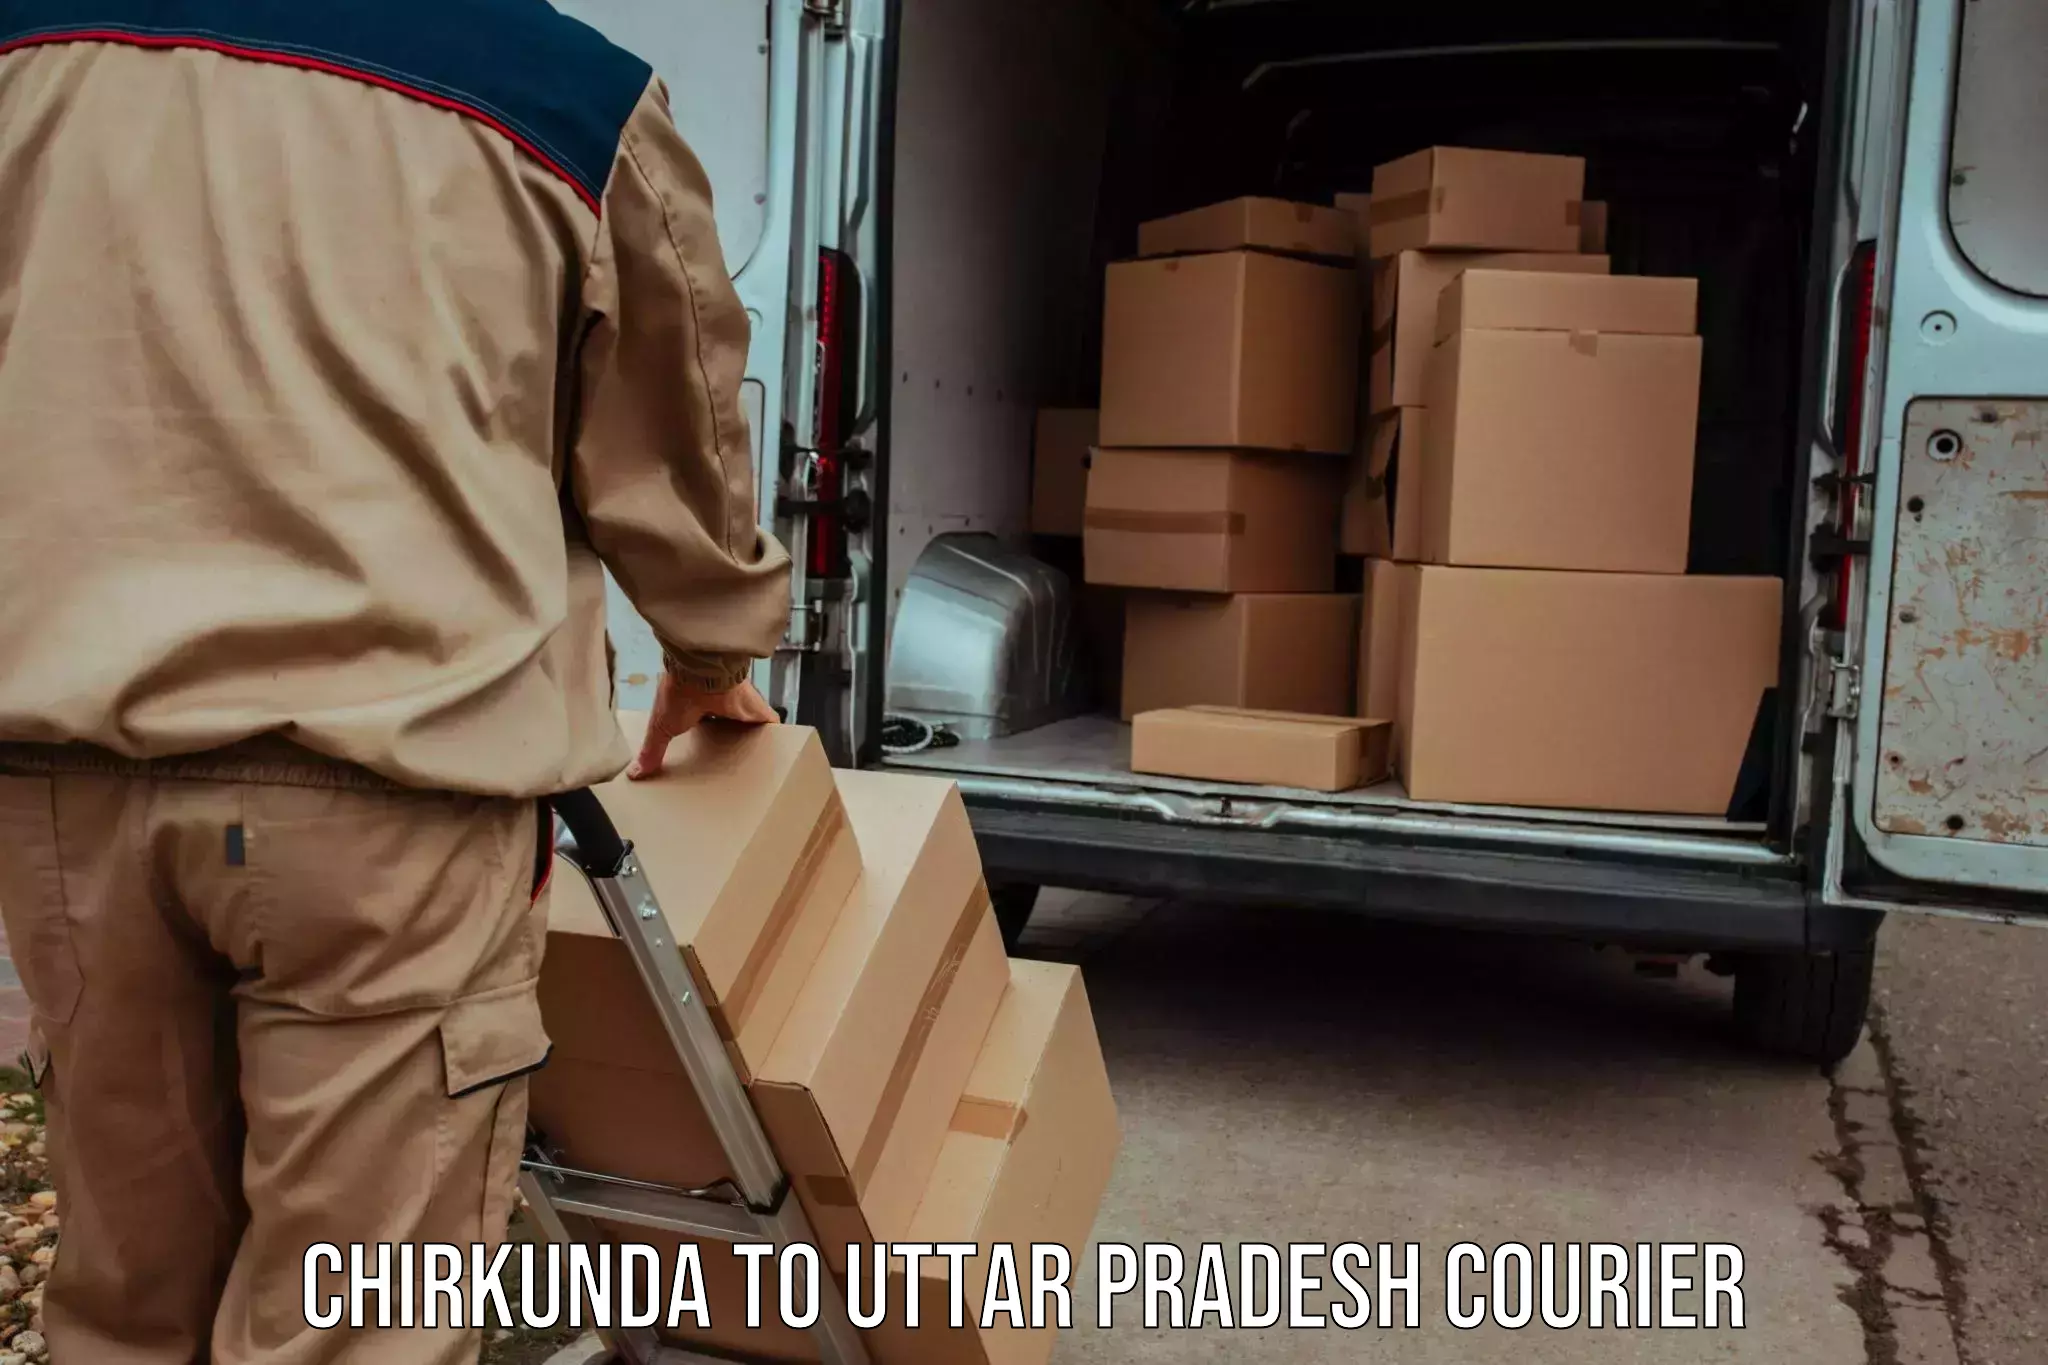 Professional courier handling Chirkunda to Lucknow